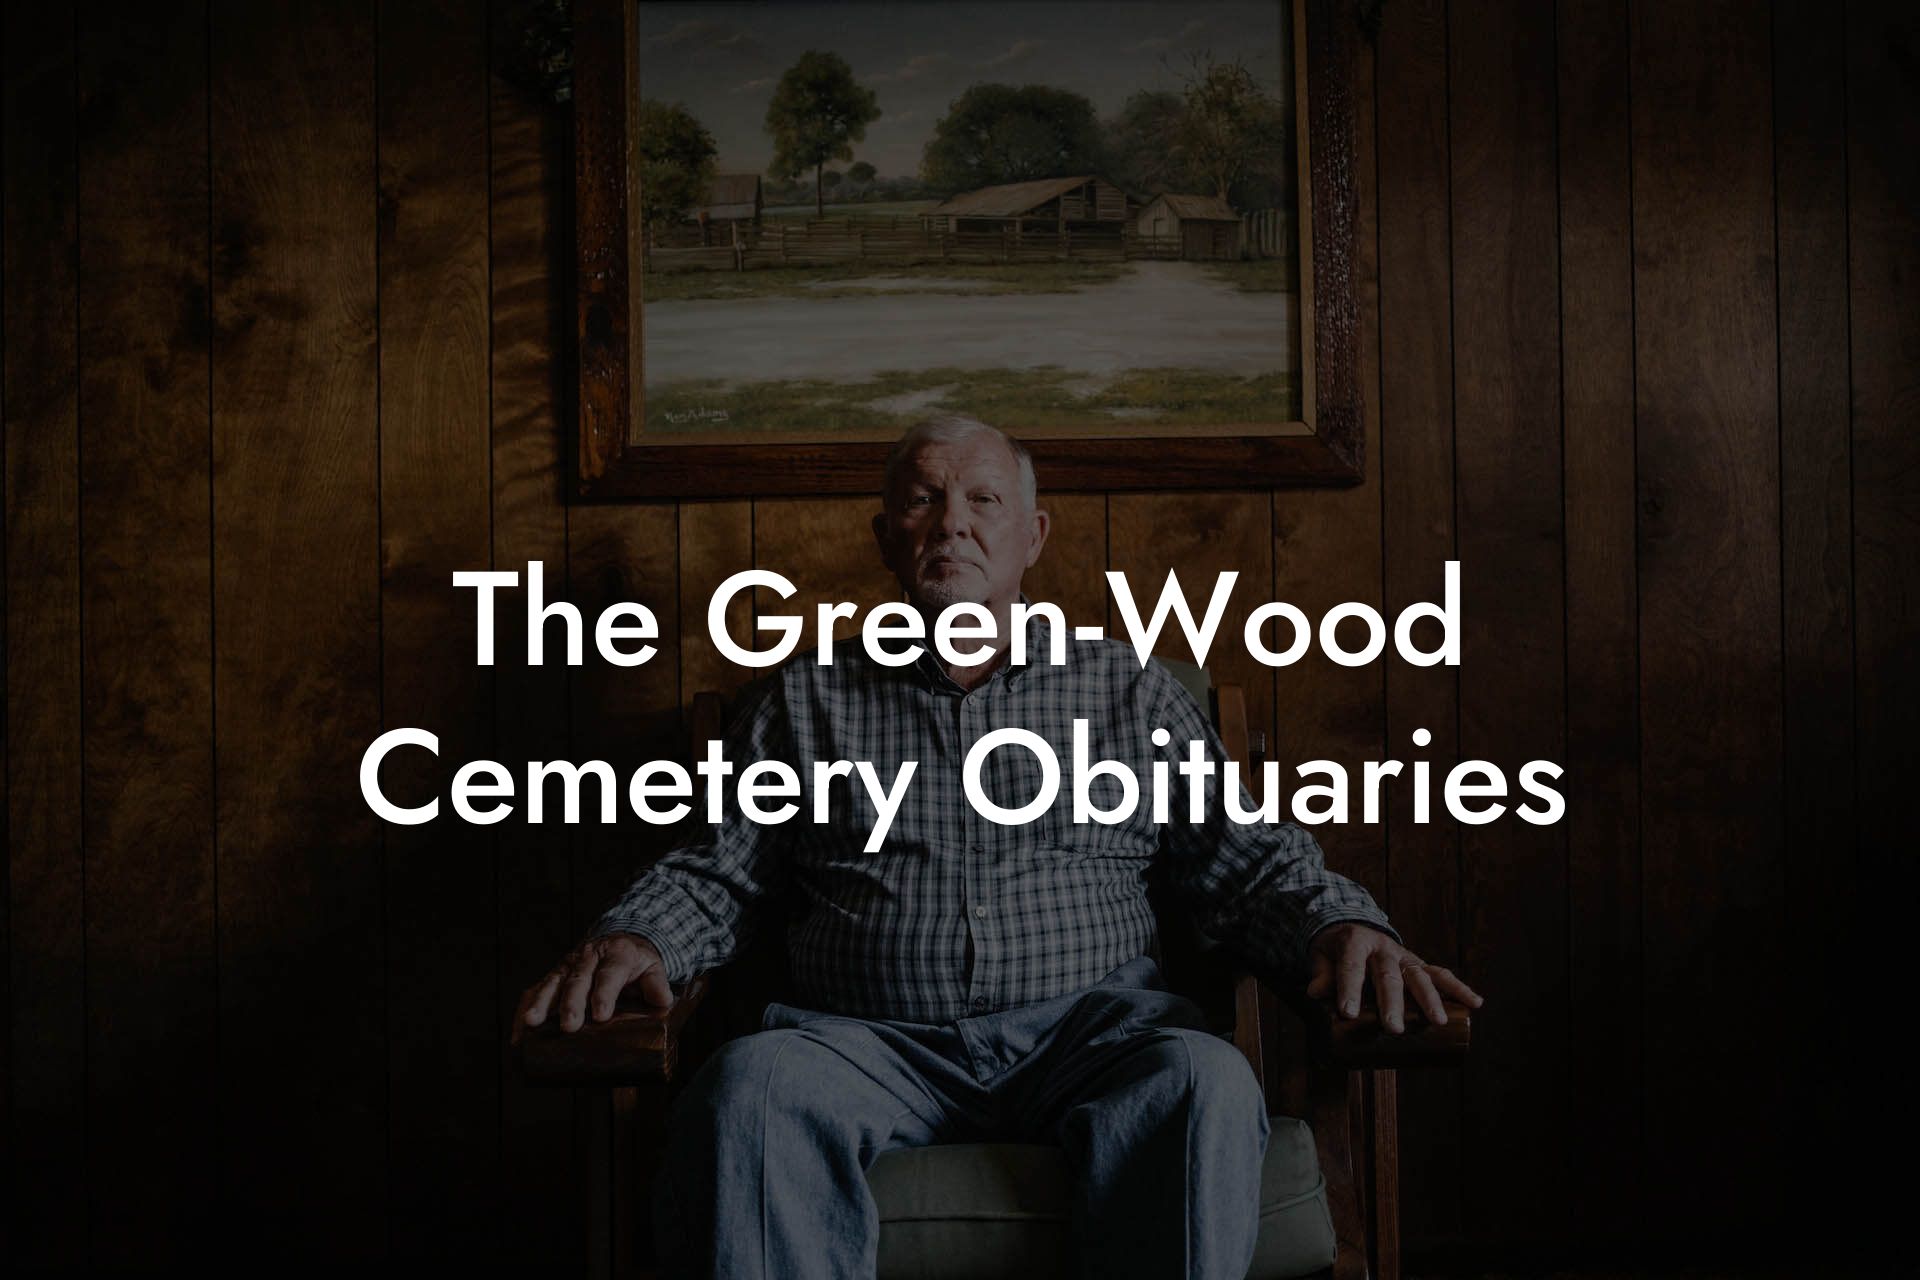 The Green-Wood Cemetery Obituaries